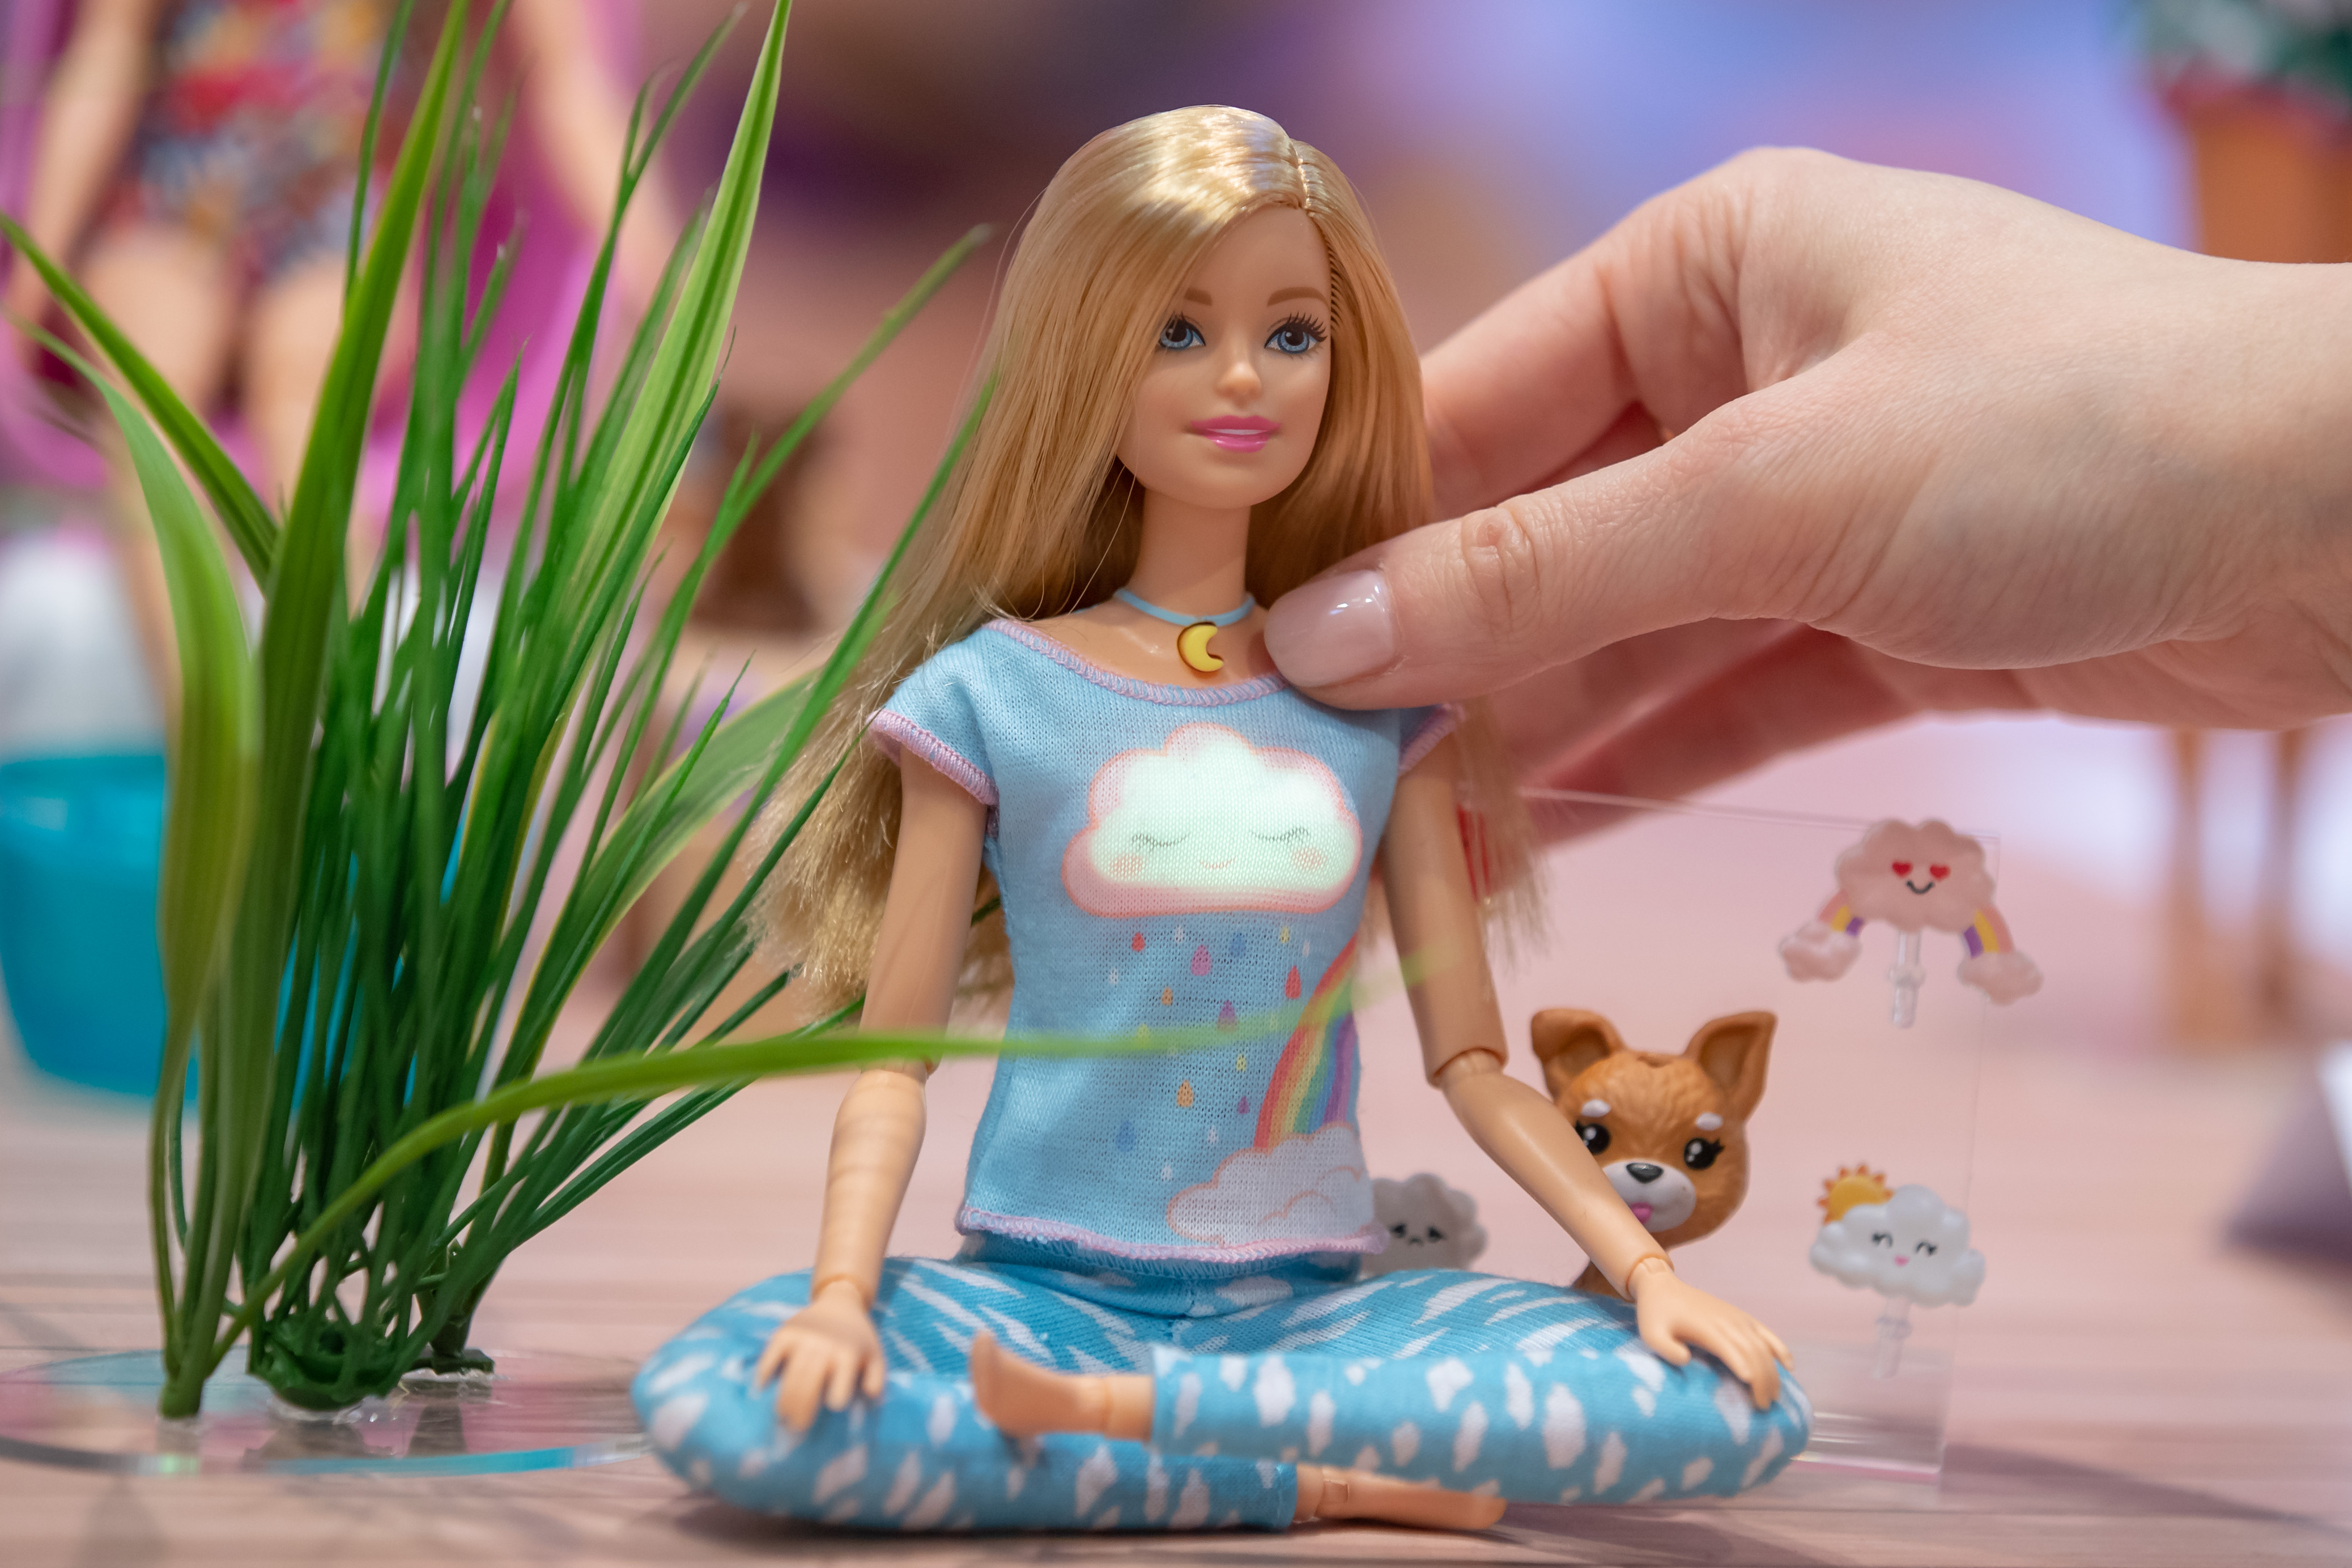 Coronavirus May Cause You To Pay More For Barbie Dolls And Star Wars Toys